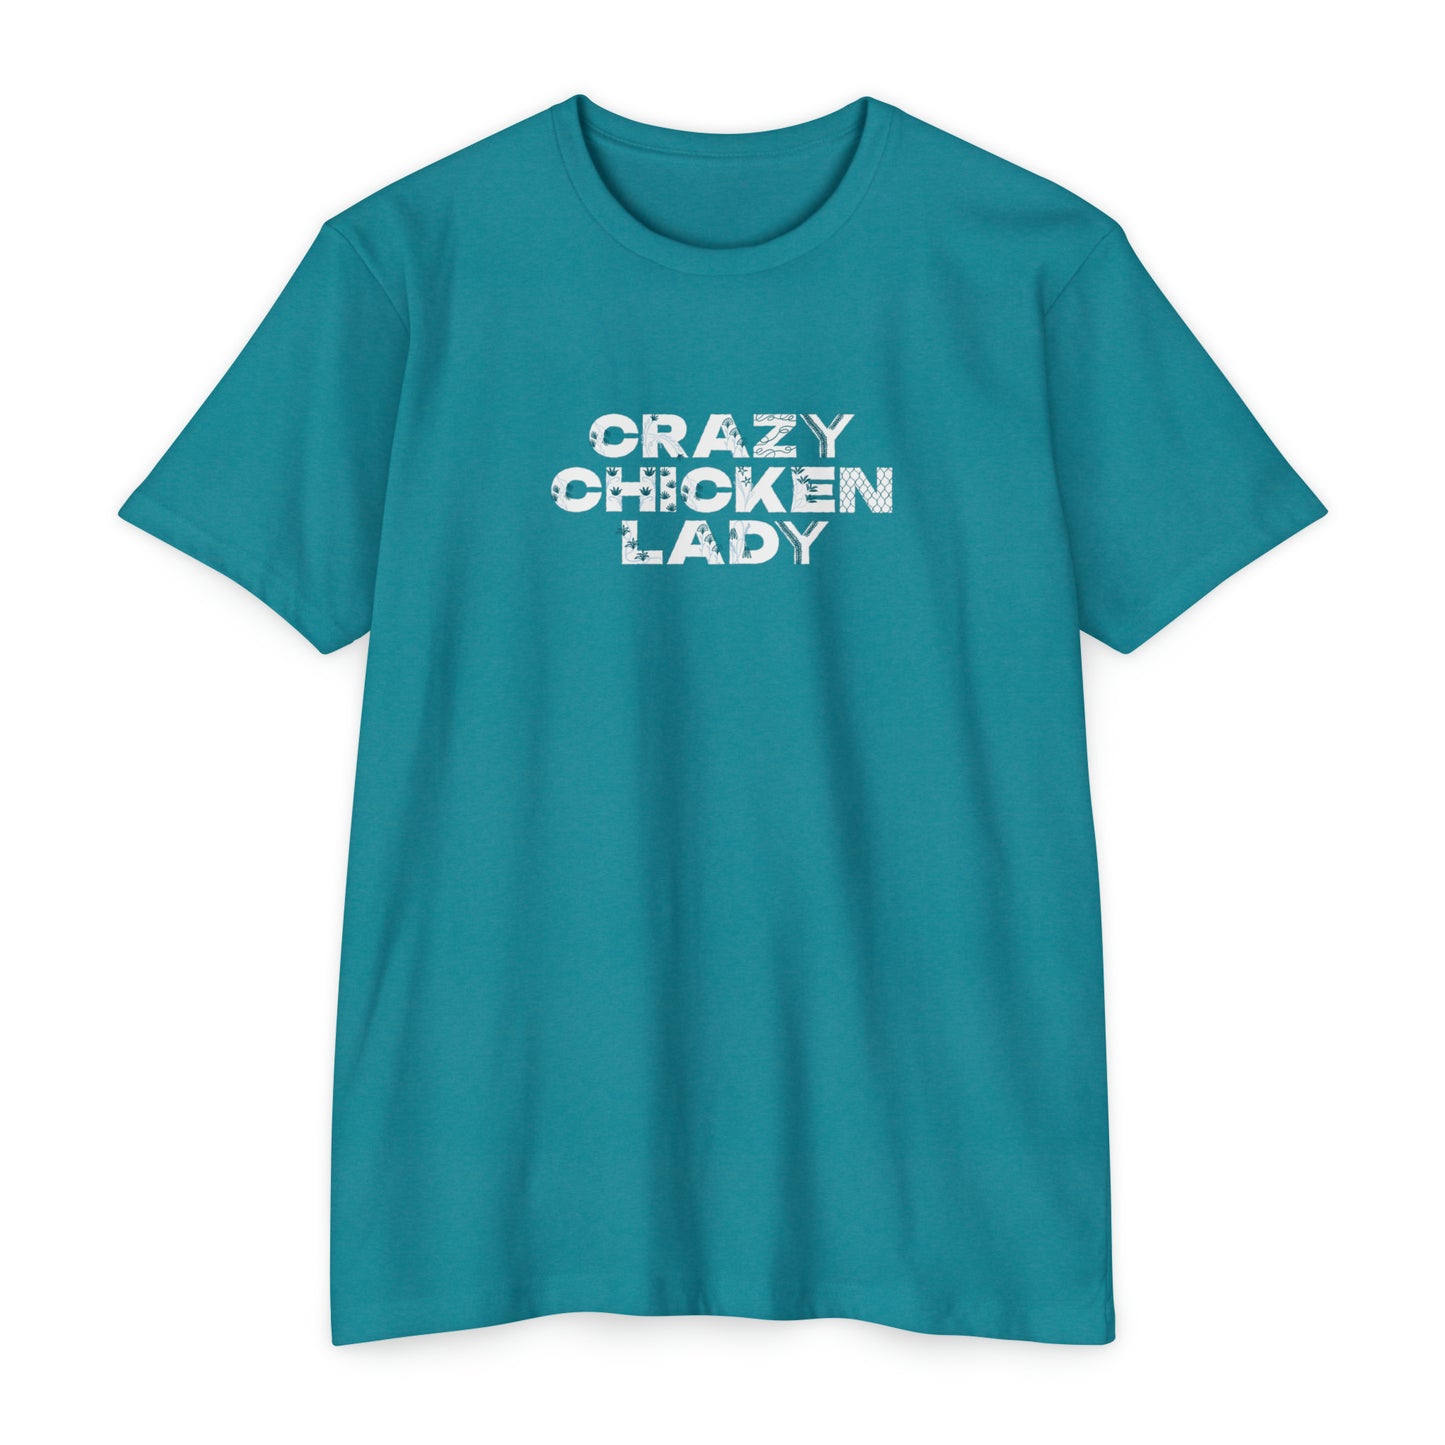 Chicken Lady T-shirt | Jersey Tee for Crazy Chicken Lady | Hen & Chicken Lover, Farm Life